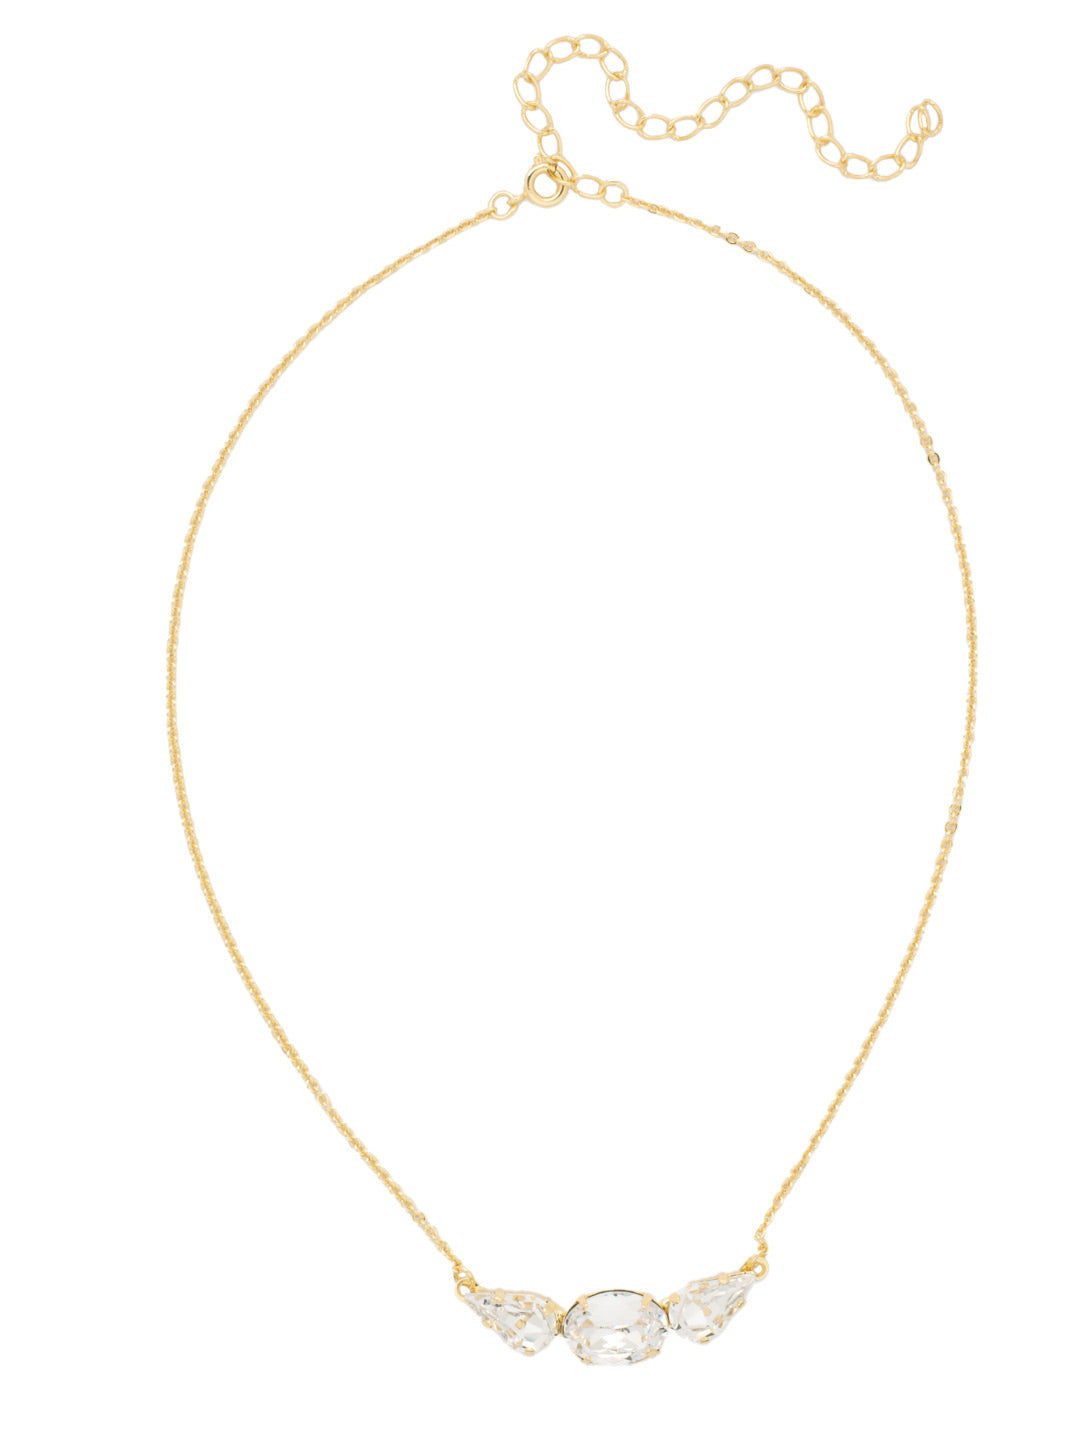 Oval and Pear Tennis Necklace - NFL14BGCRY - <p>The Oval and Pear Tennis Necklace features alternating oval and pear cut crystals on an adjustable chain, secured by a lobster claw clasp. From Sorrelli's Crystal collection in our Bright Gold-tone finish.</p>